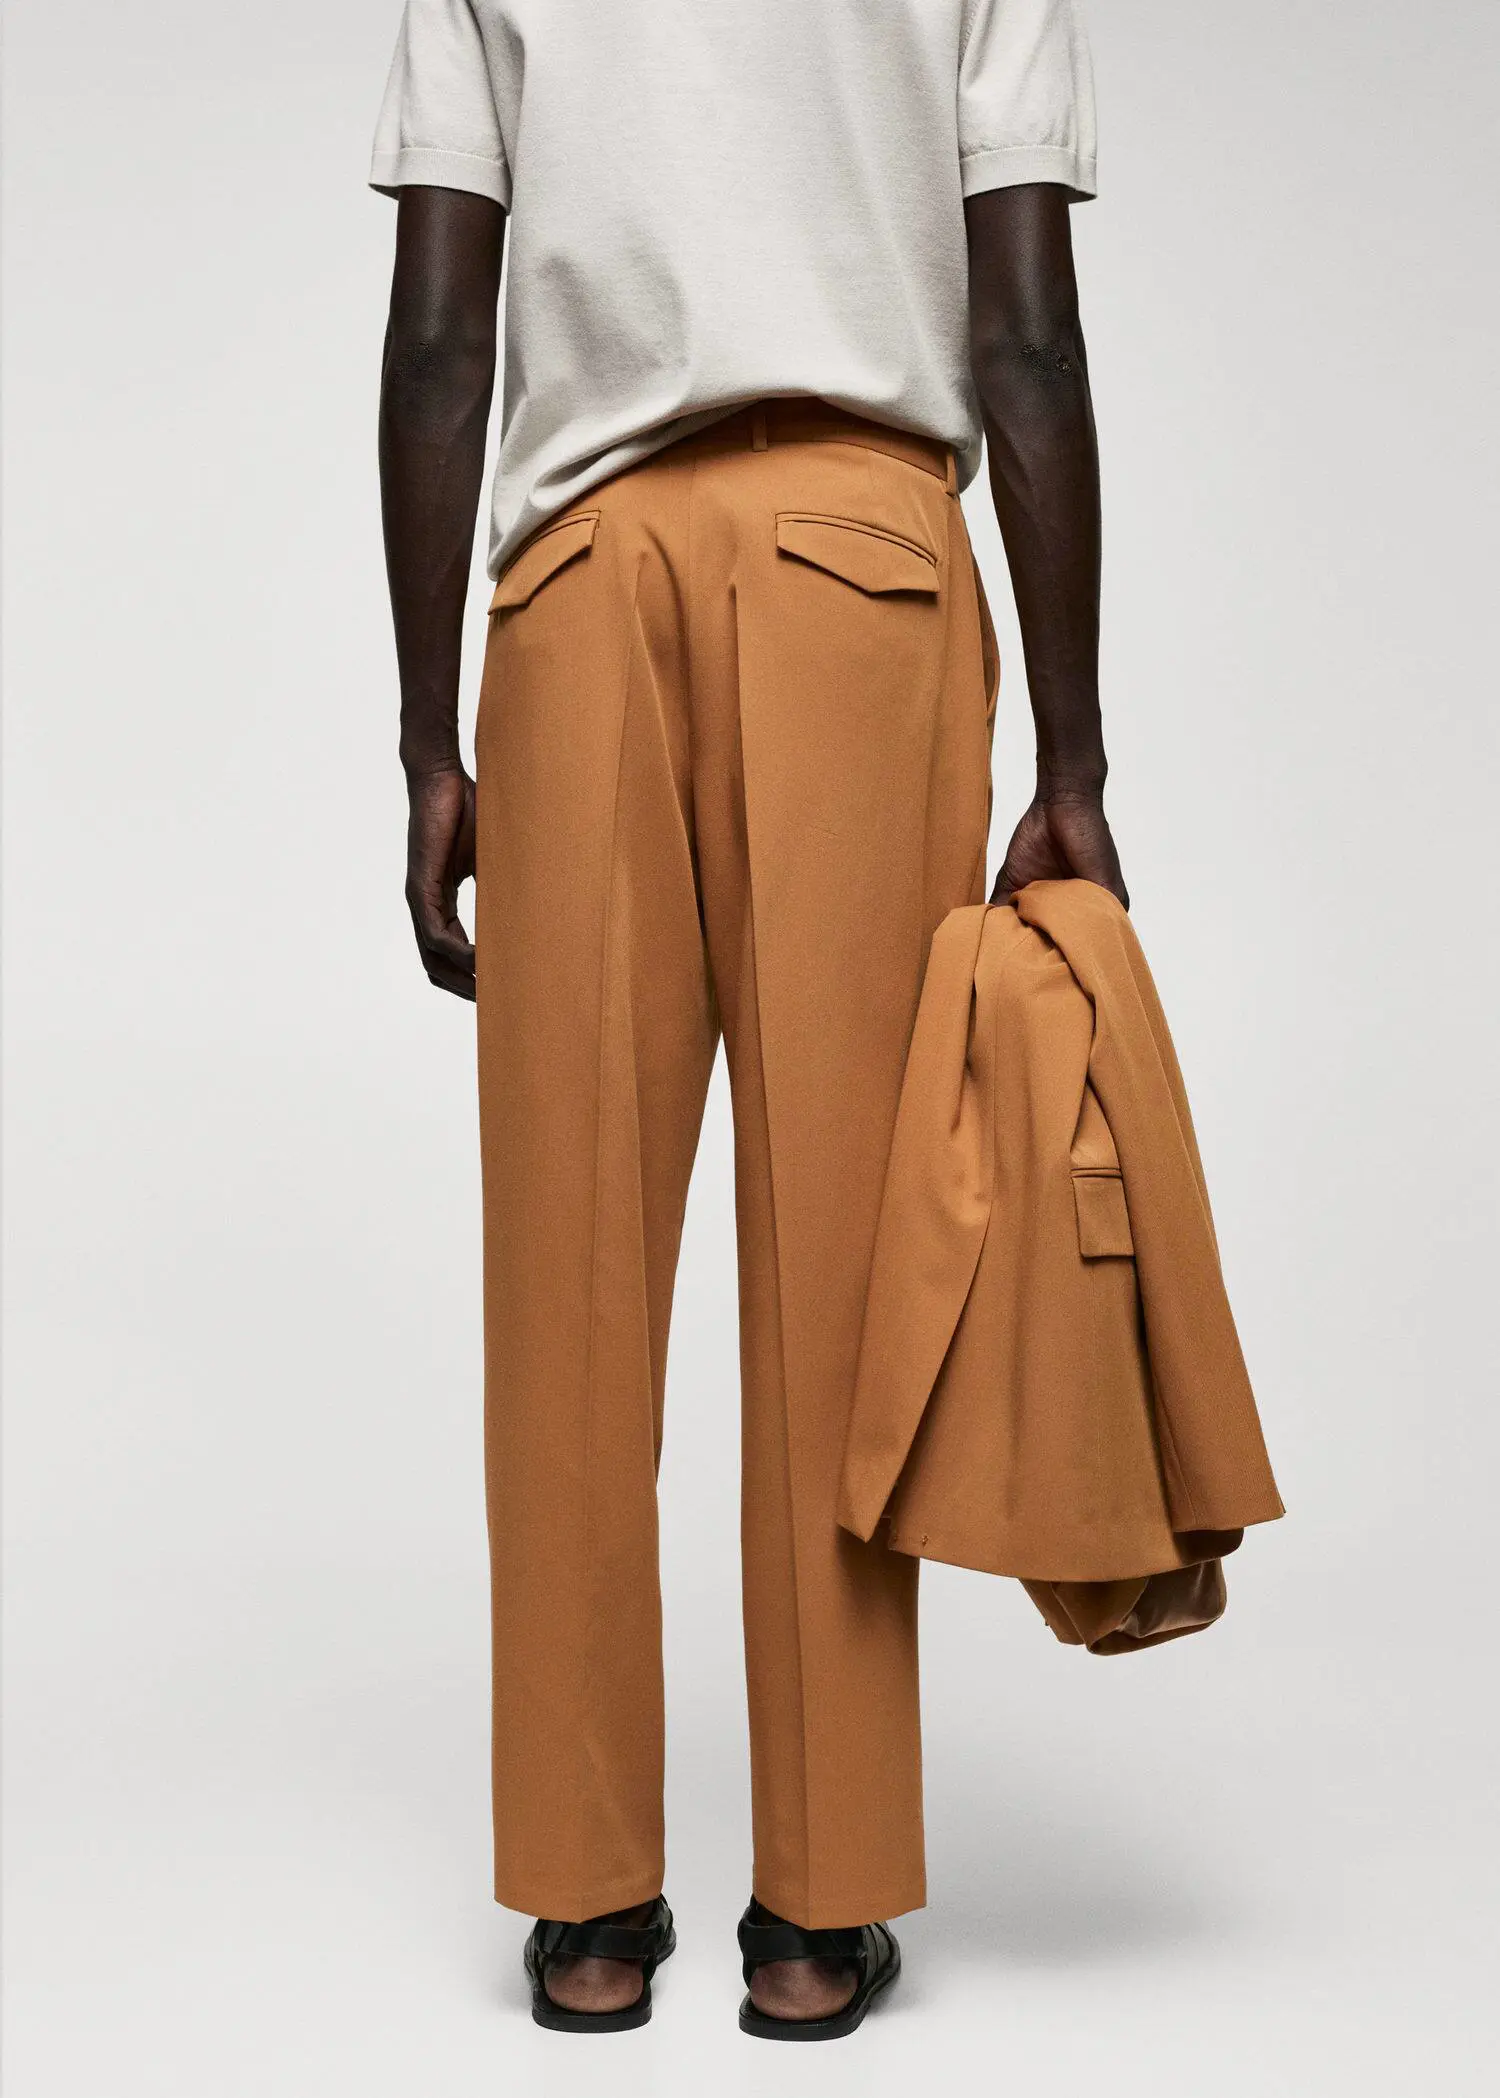 Mango Regular-fit suit pants with pleats. a man in a tan suit is holding a jacket. 